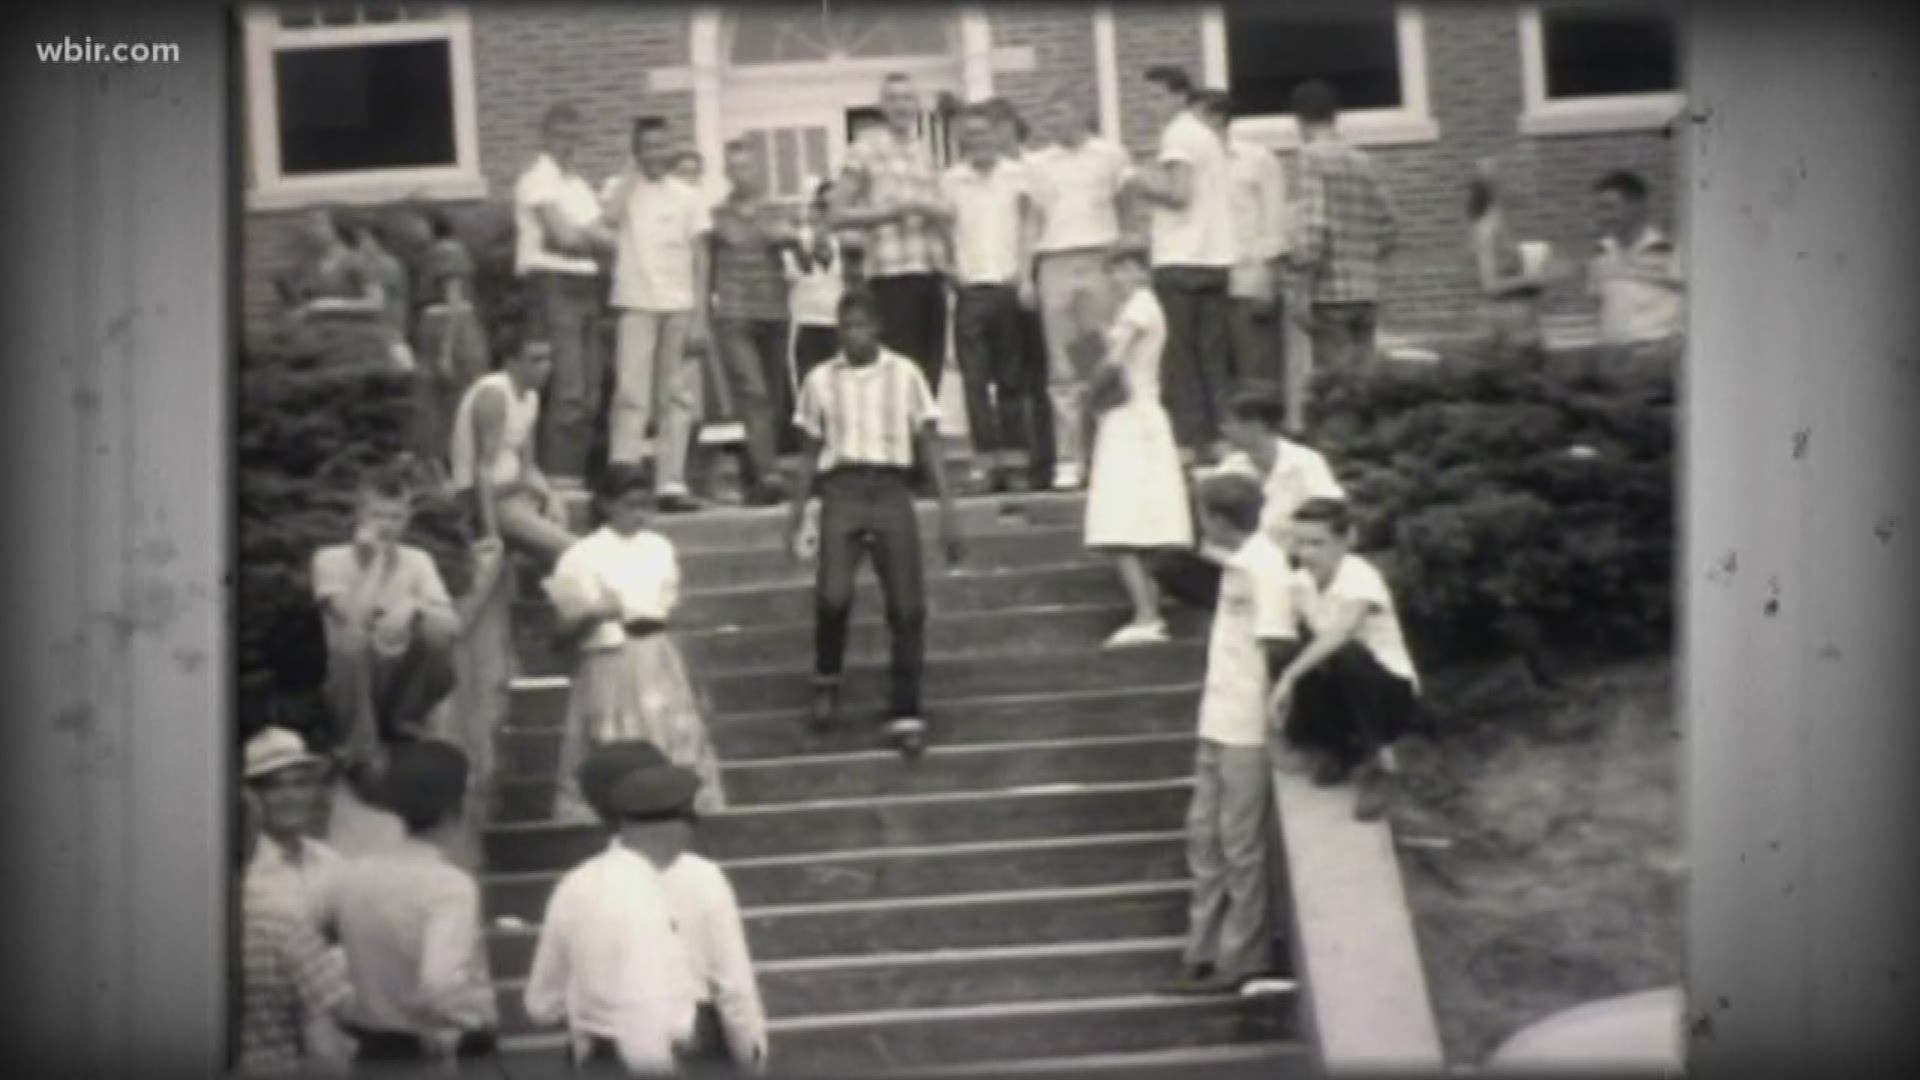 More than six decades ago, 12 students braved threats of violence to attend high school in Clinton, Tennessee. 10News reporter Leslie Ackerson is in Clinton with more on how the walk will honor the students who paved the way for change.